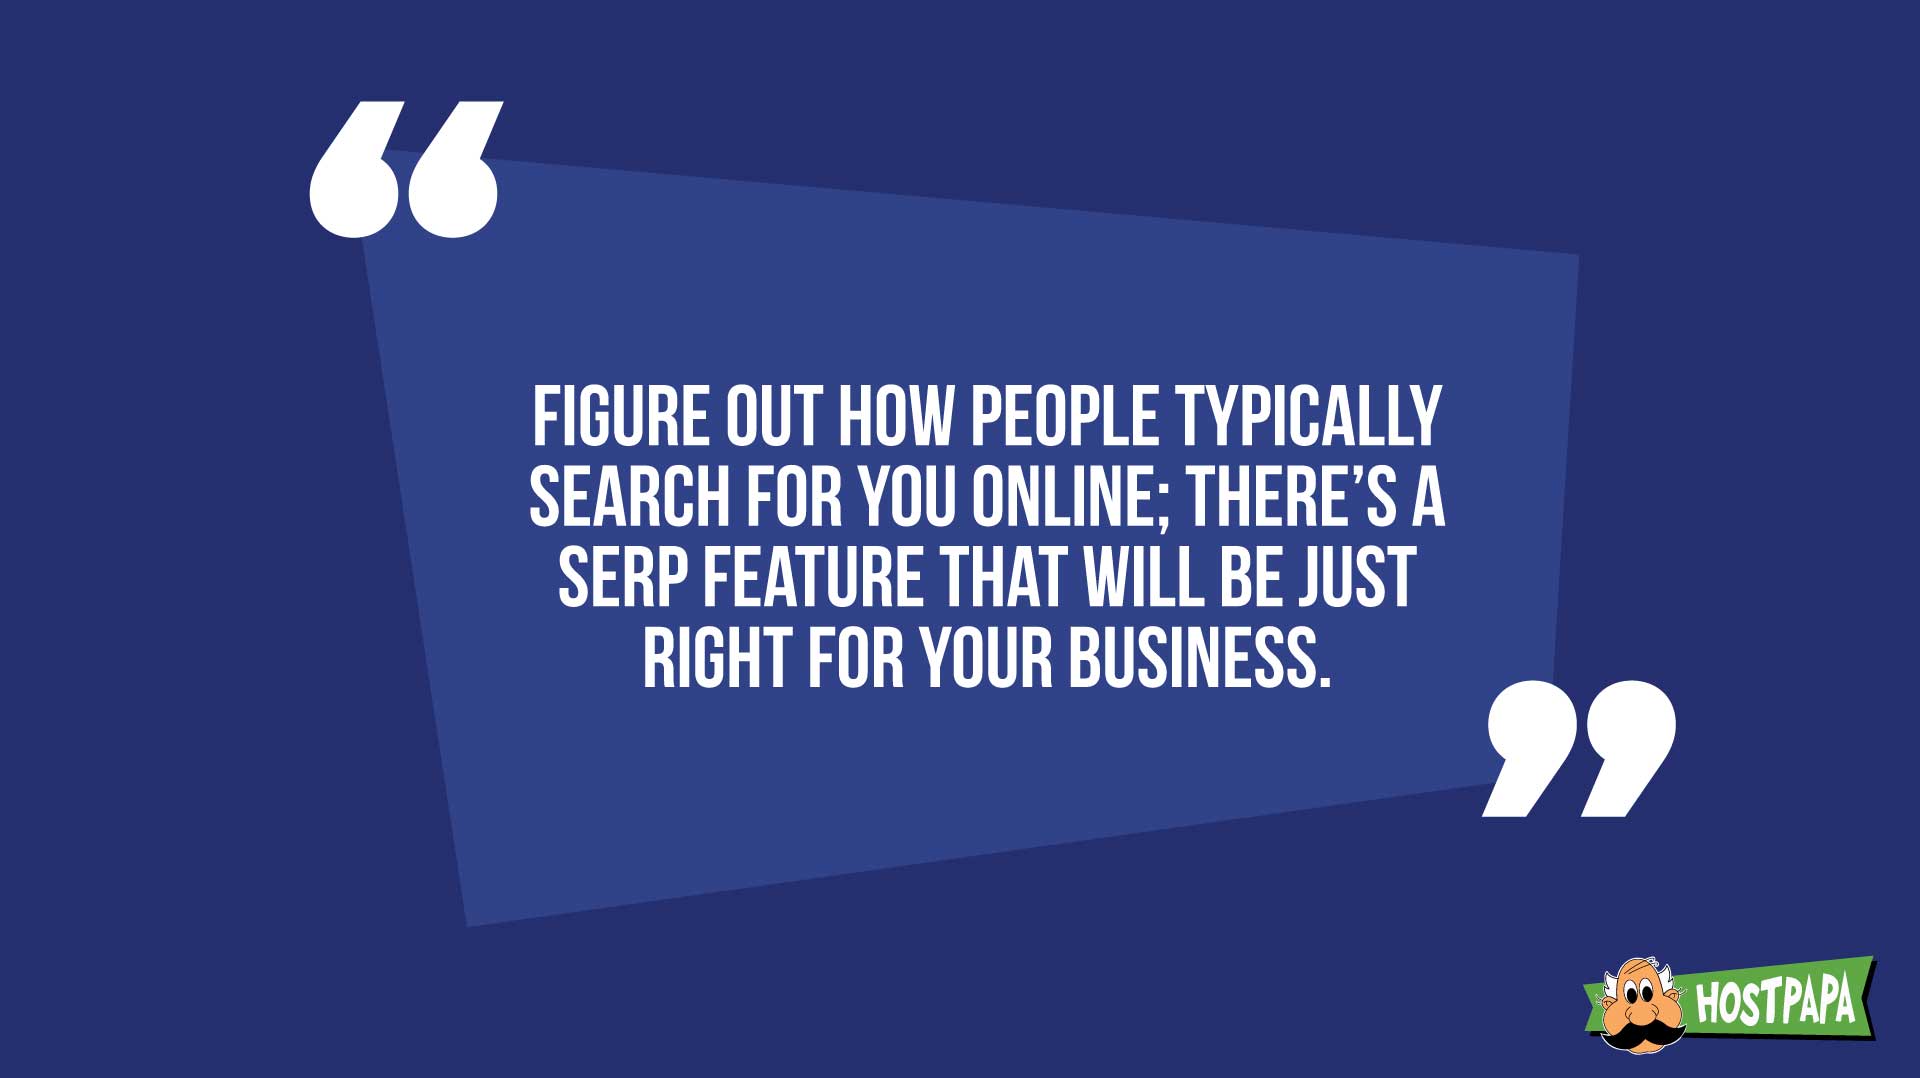 Figure out how people typically search for you online: there's a serp feature that will be just right for your business